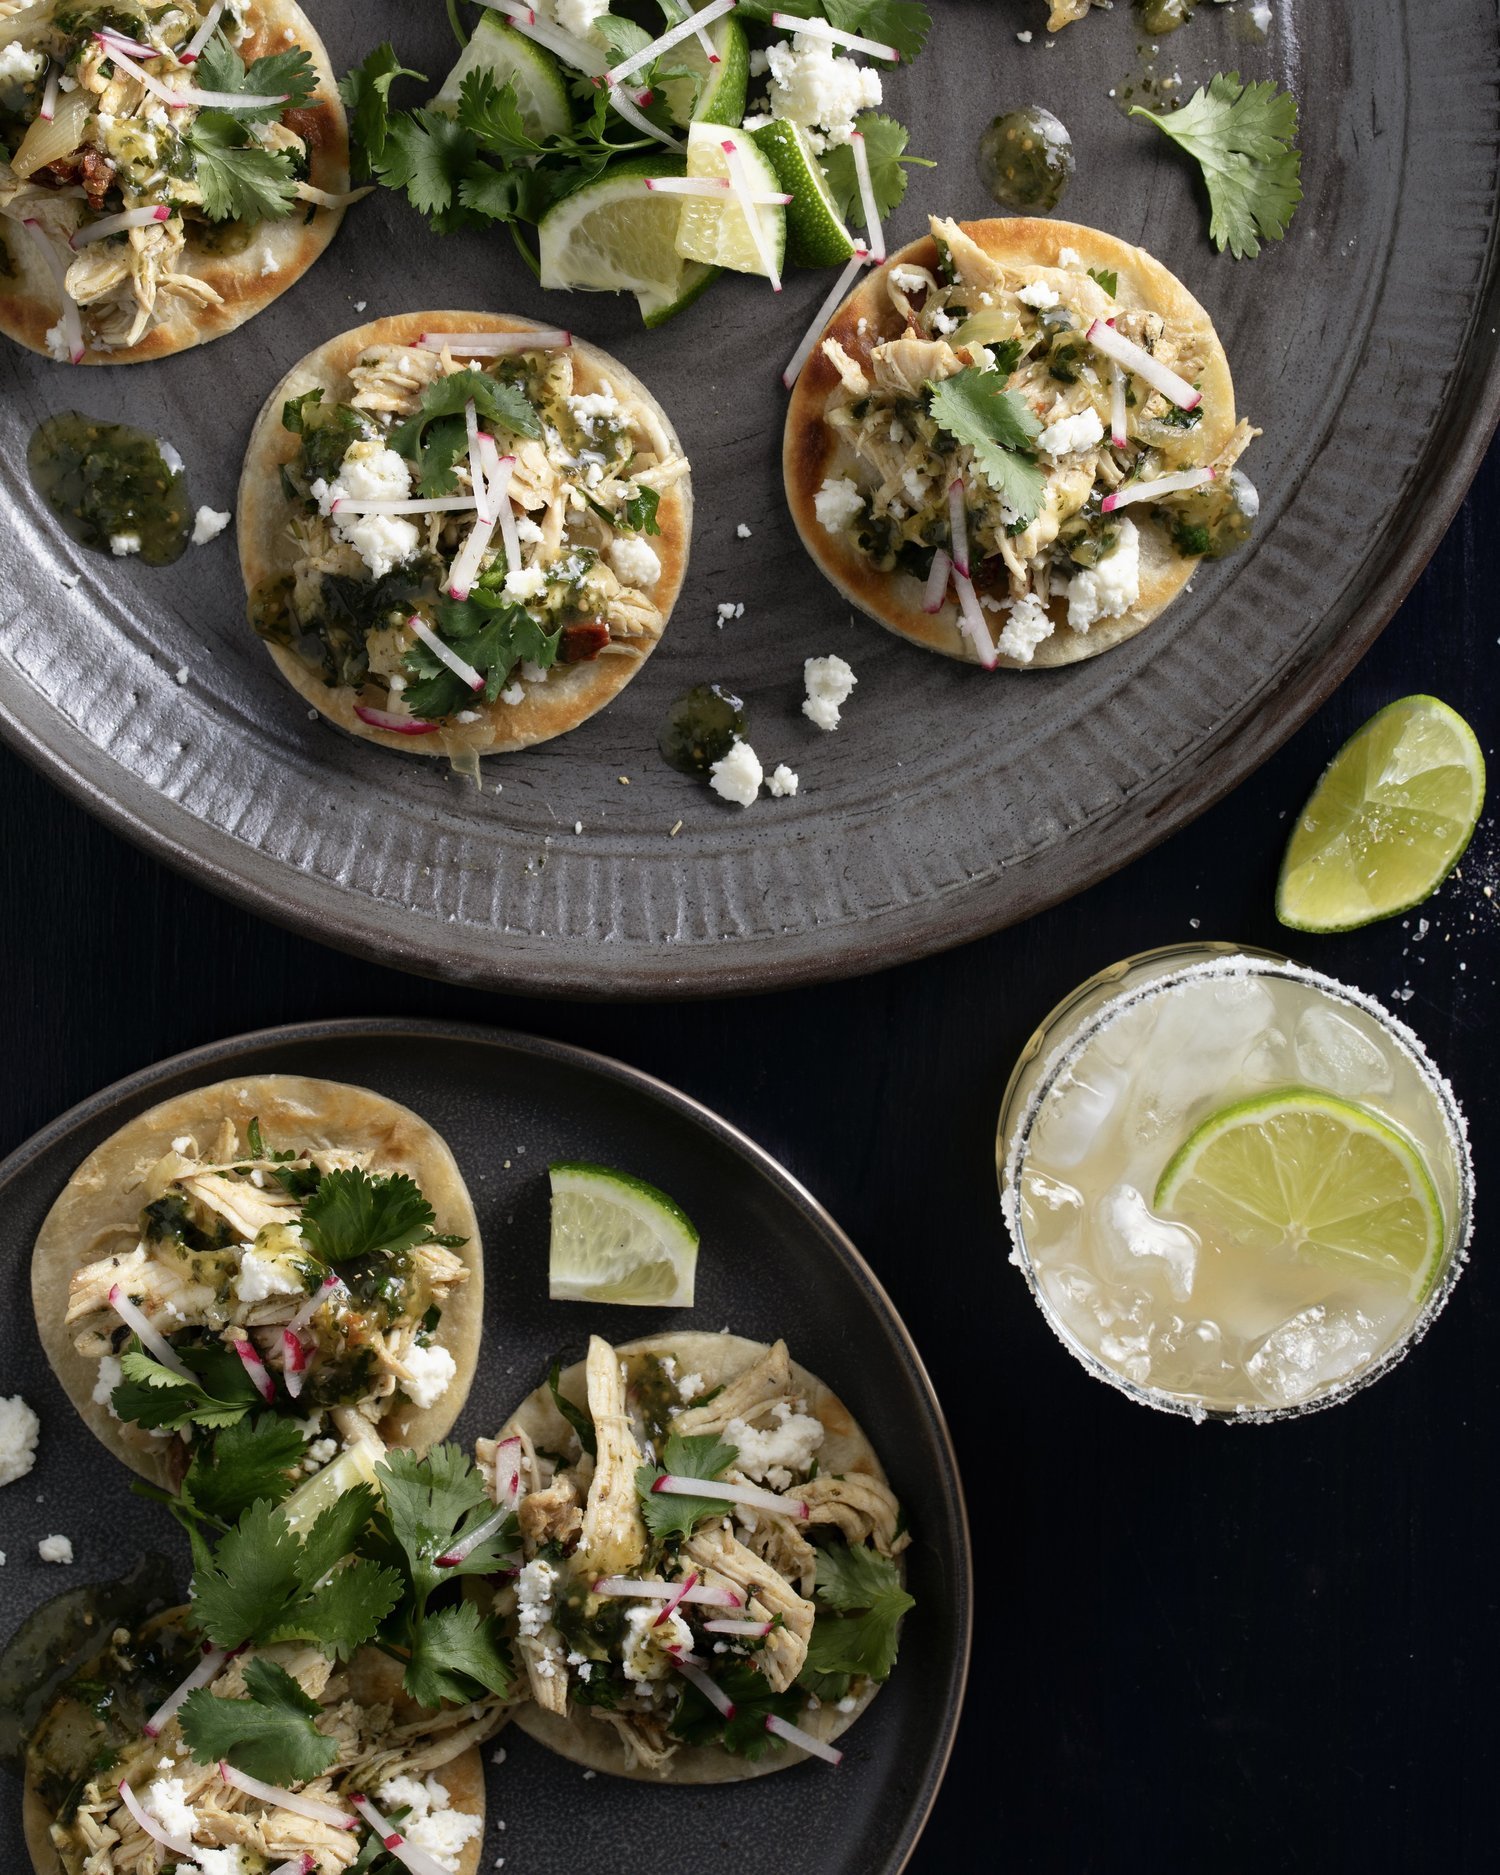 Little tortillas hold chicken, cheese, and cilantro on a grey plate for the super bowl spread.